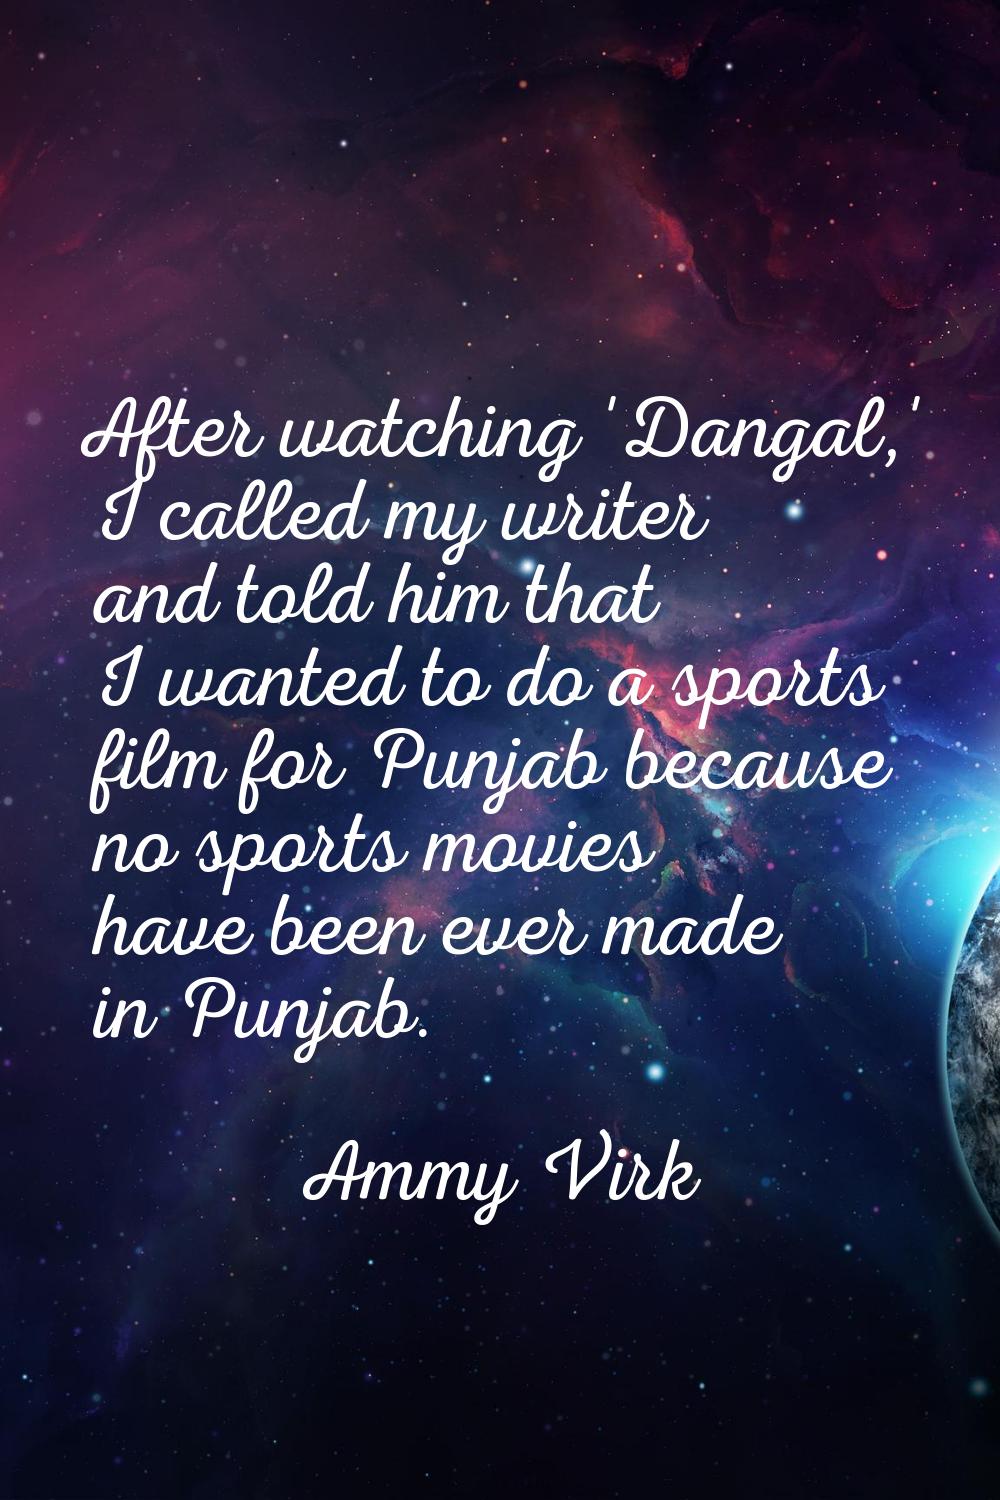 After watching 'Dangal,' I called my writer and told him that I wanted to do a sports film for Punj